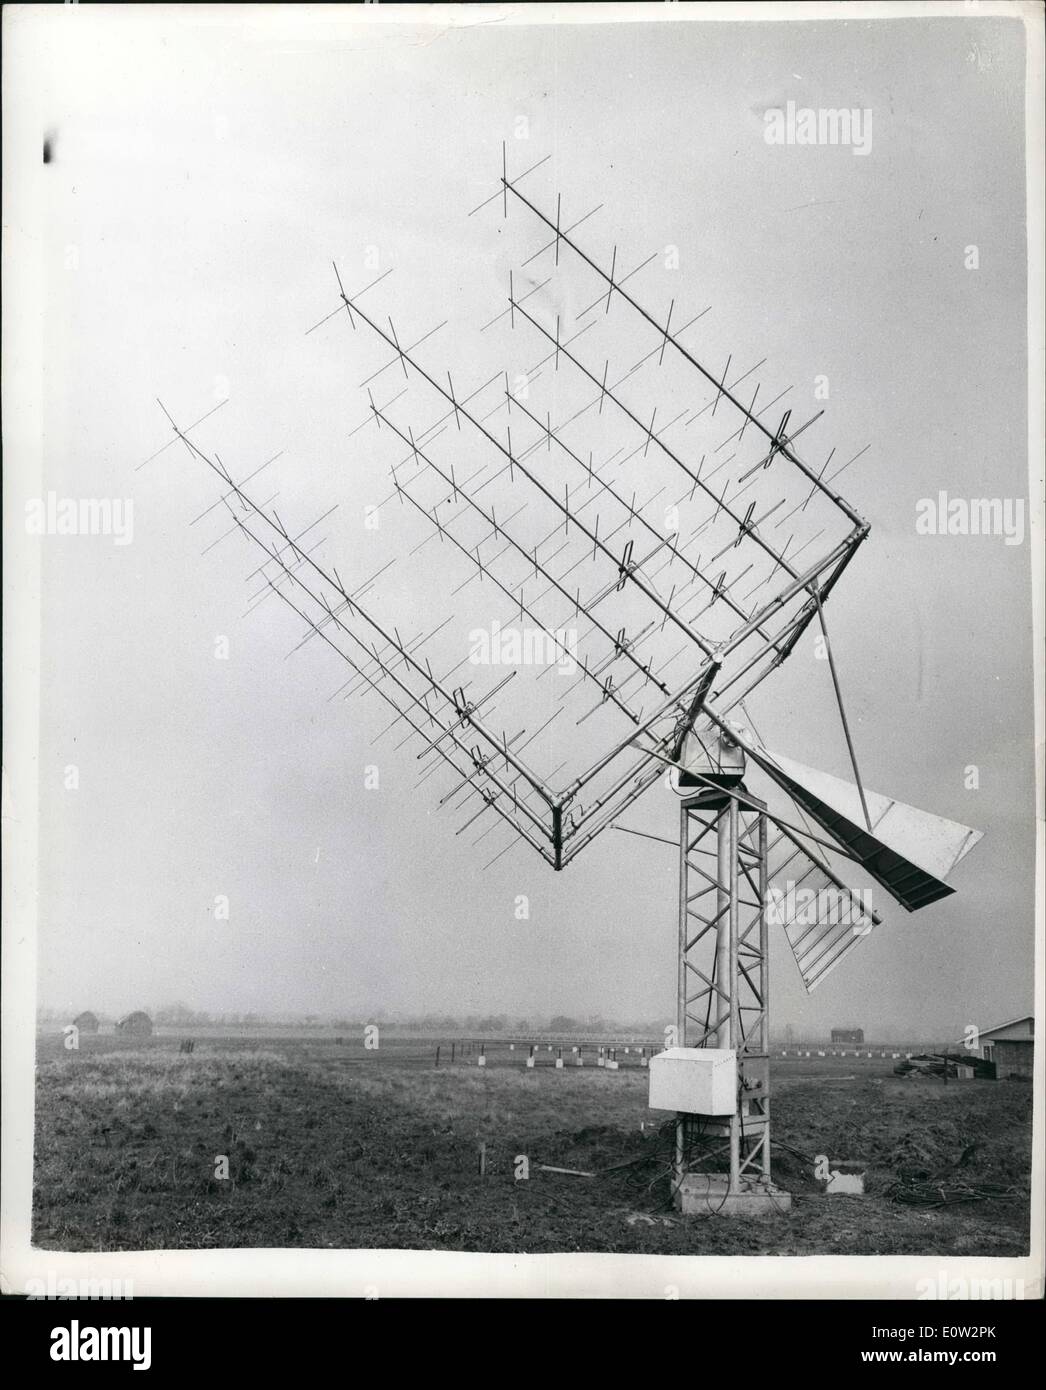 Jan. 01, 1961 - Minitrack station at Winkfield Berkshire.: A press view map was held today to the Minitrack Station at Winkfield, Berkshire. it is part of the large network of similar stations throughout the world for tracking satellites on frequency band of. It is operated by staff of the Department of Scientific and Industrial Research. Photo shows a steorable telemetry aerial, used for receiving the results of experiments in satellites. Stock Photo